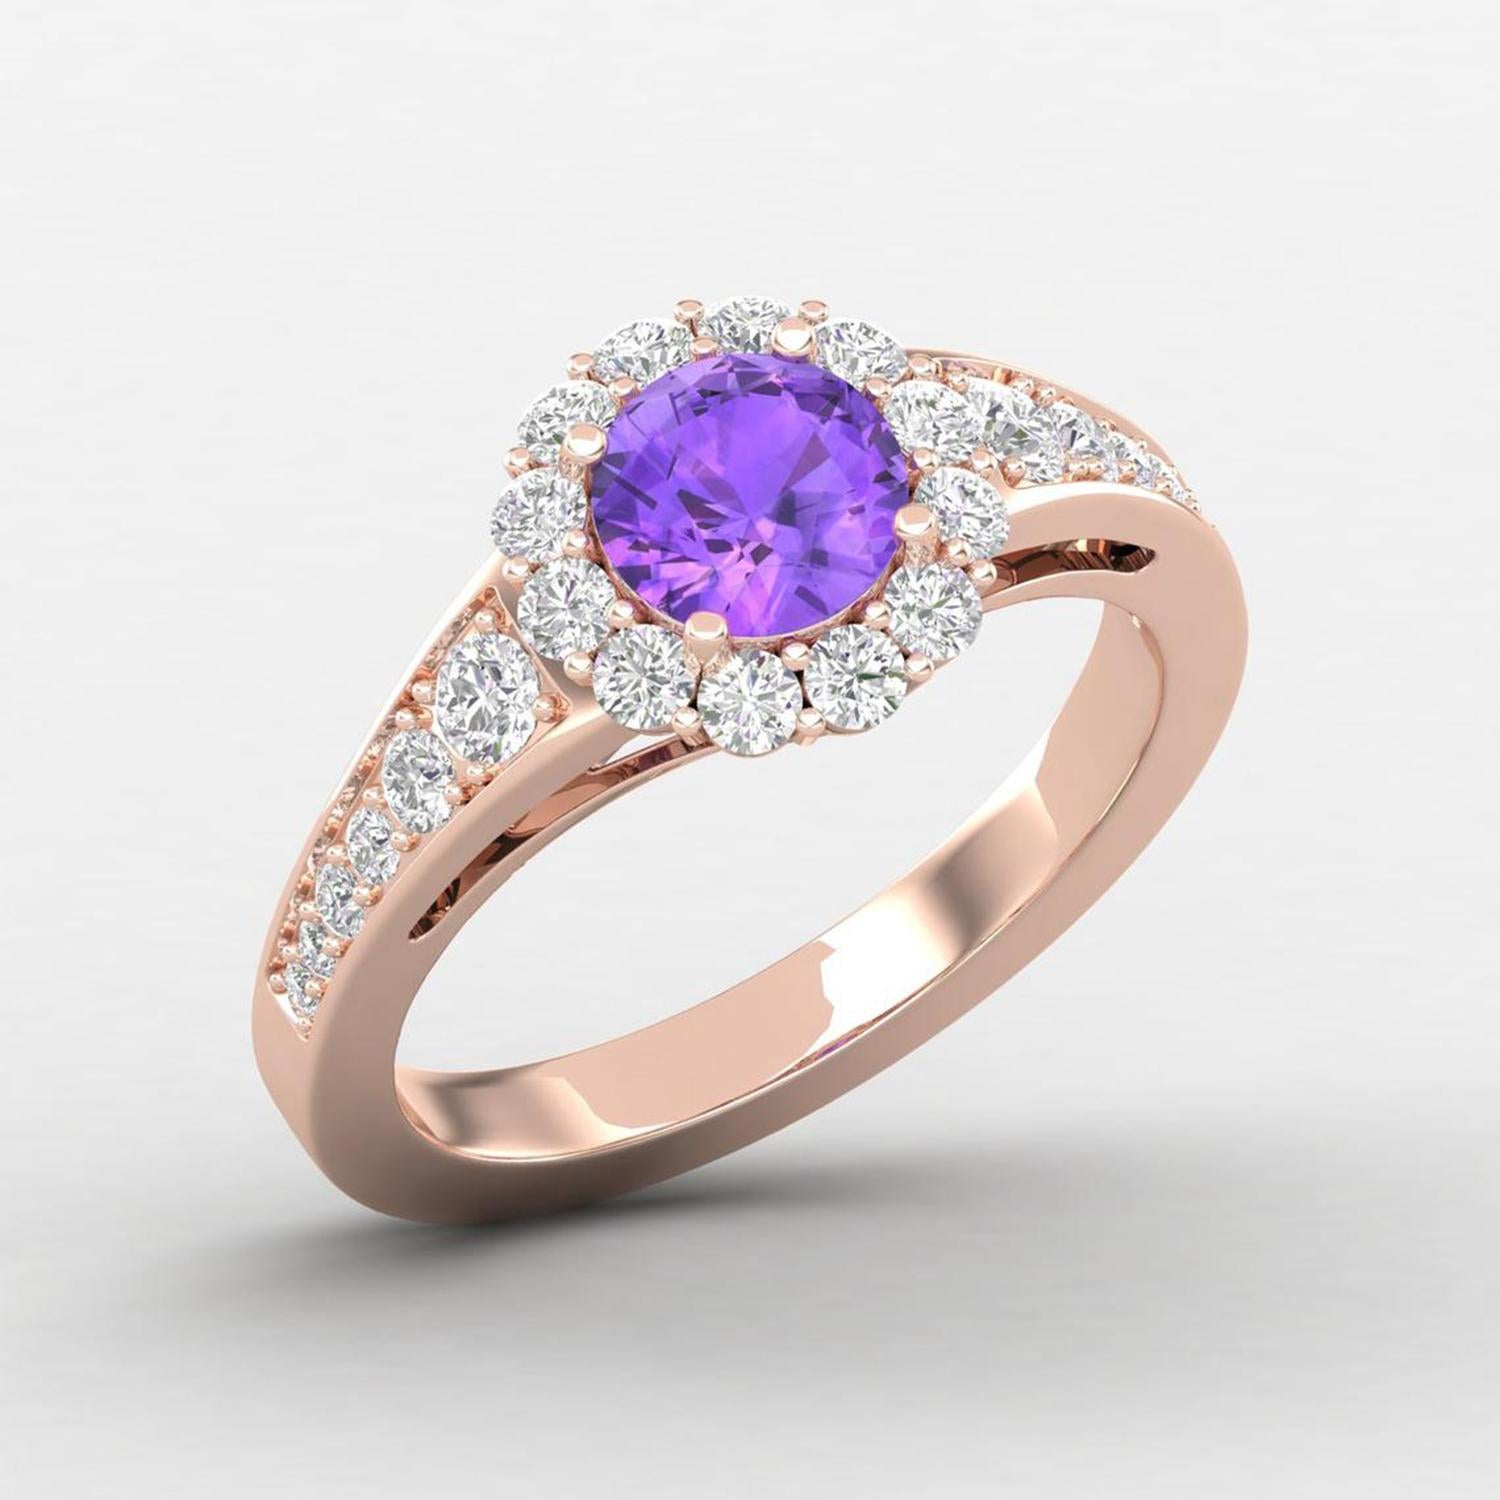 Round Cut 14 Karat Gold Round Amethyst Ring / Round Diamond Ring / Solitaire Ring For Sale